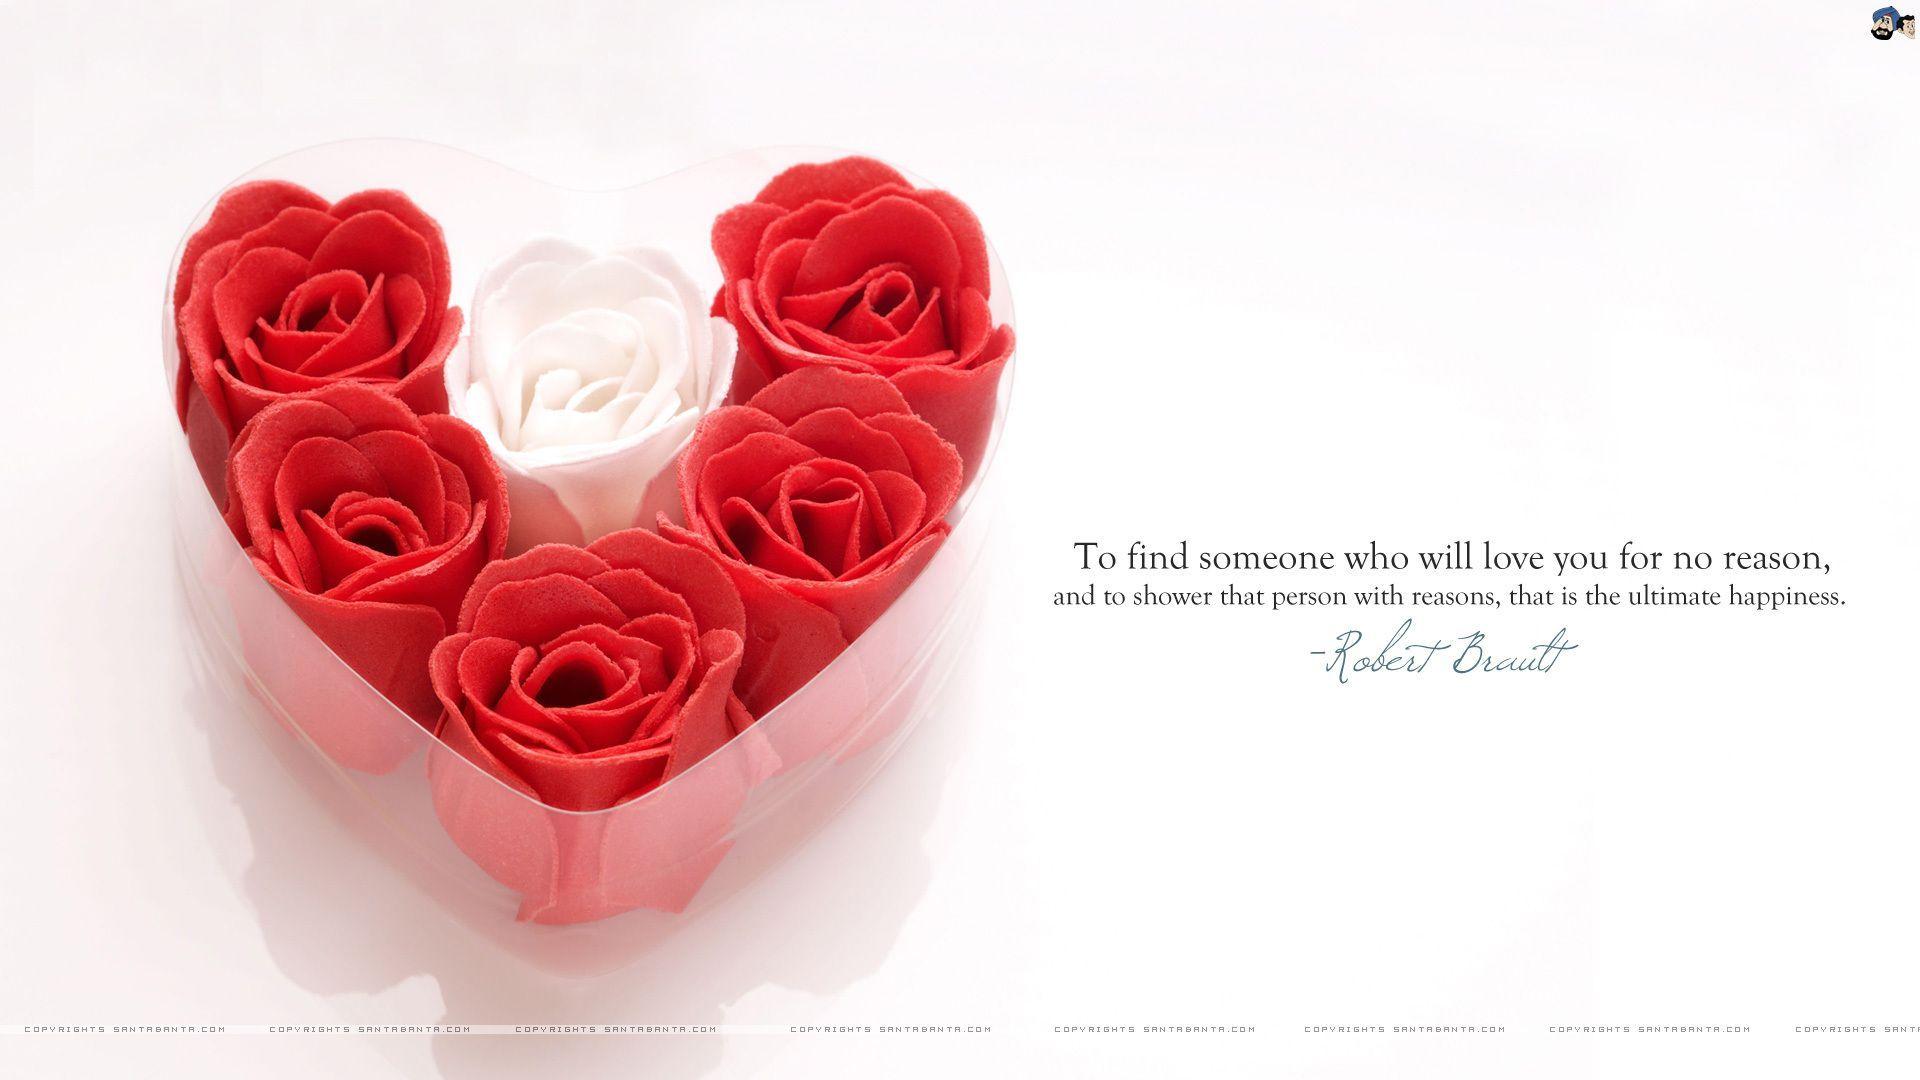 Love Quotes Image HD Wallpaper. Recipes to Cook